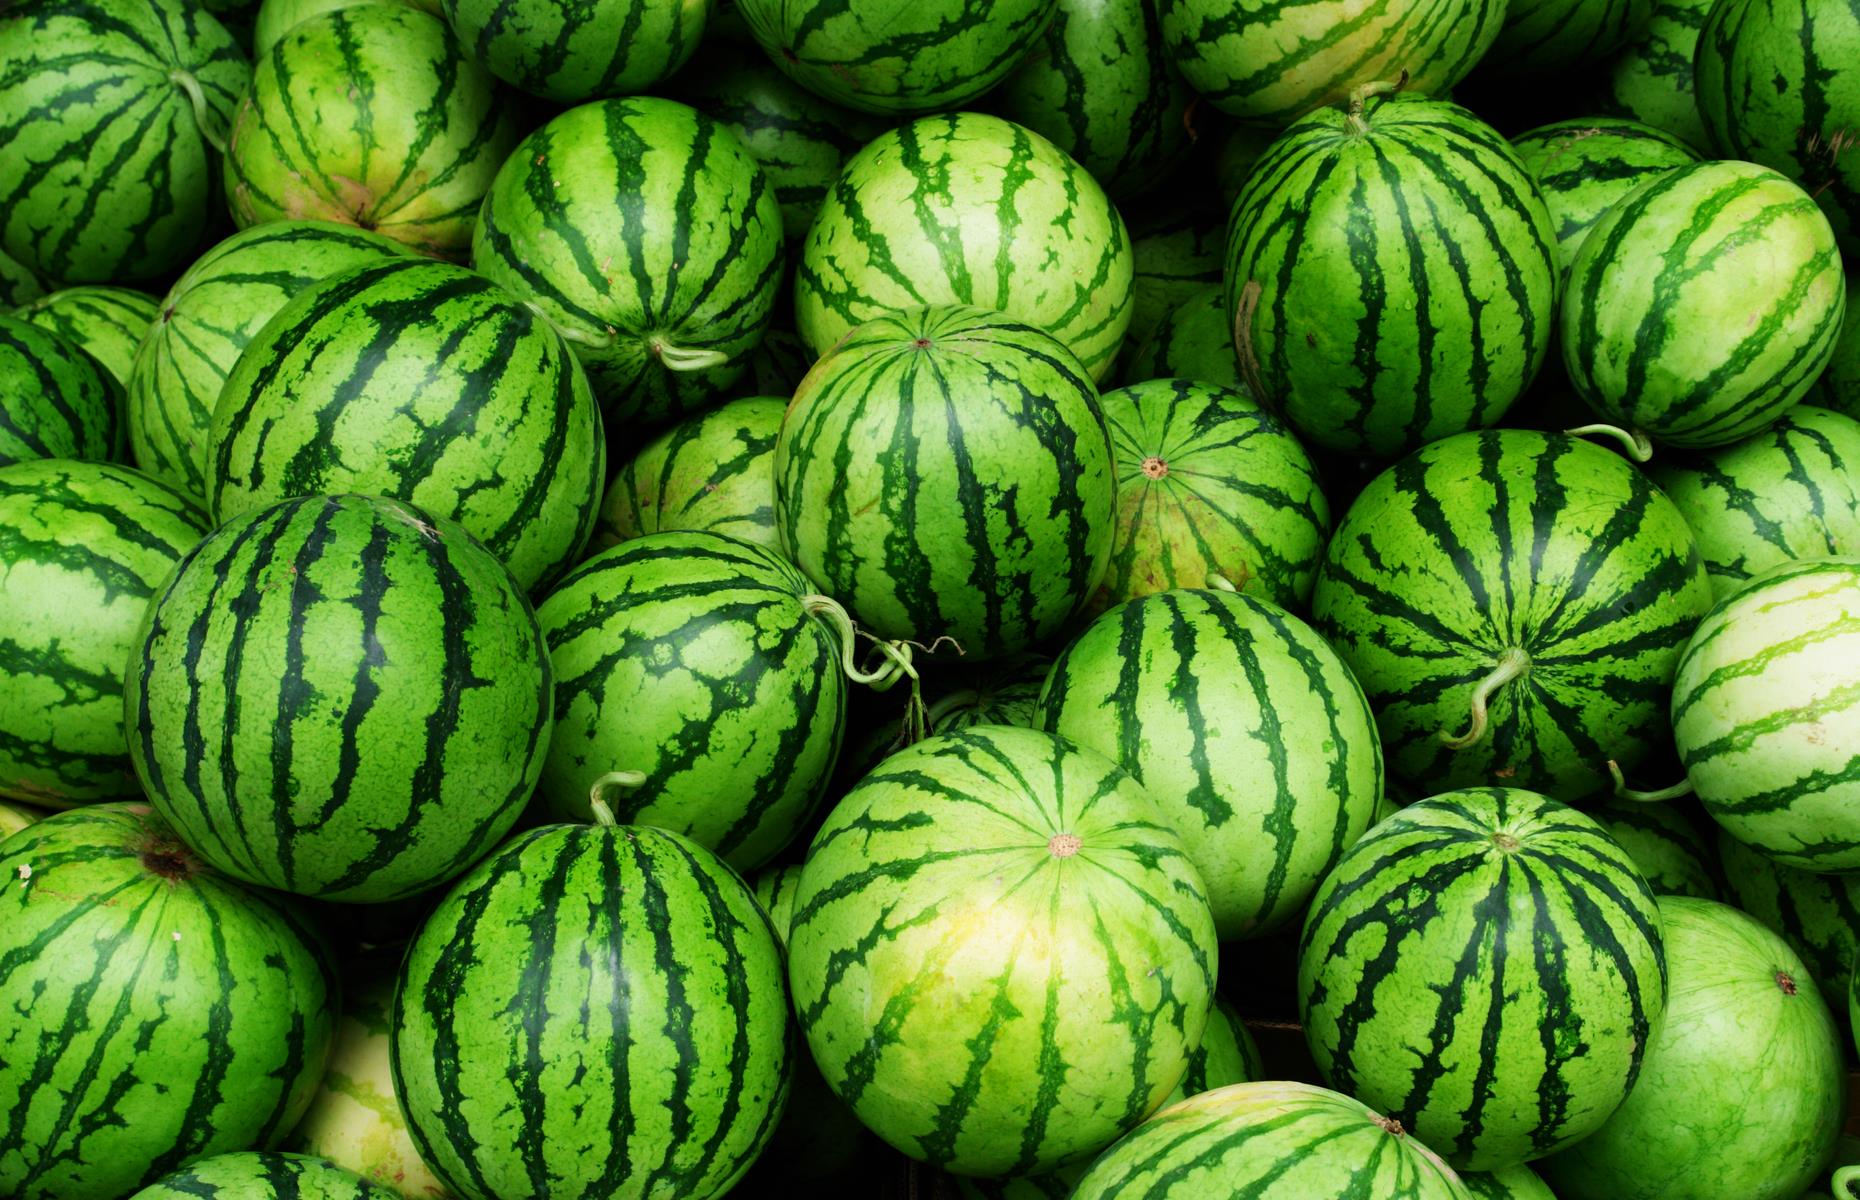 <p>We thought the only real watermelon debate was whether to spit out the pips (and how to do so with a semblance of elegance). But Oklahoma sparked fury when it declared the round, watery fruit its state… vegetable. The <a href="https://www.theguardian.com/world/2007/apr/18/usa.matthewweaver">controversial decision</a> was made in 2007 after senator Don Barrington argued that watermelon is both fruit and vegetable because it’s a member of the cucumber family. (Cucumber is also technically a fruit because it grows from flowers and contains seeds.)</p>